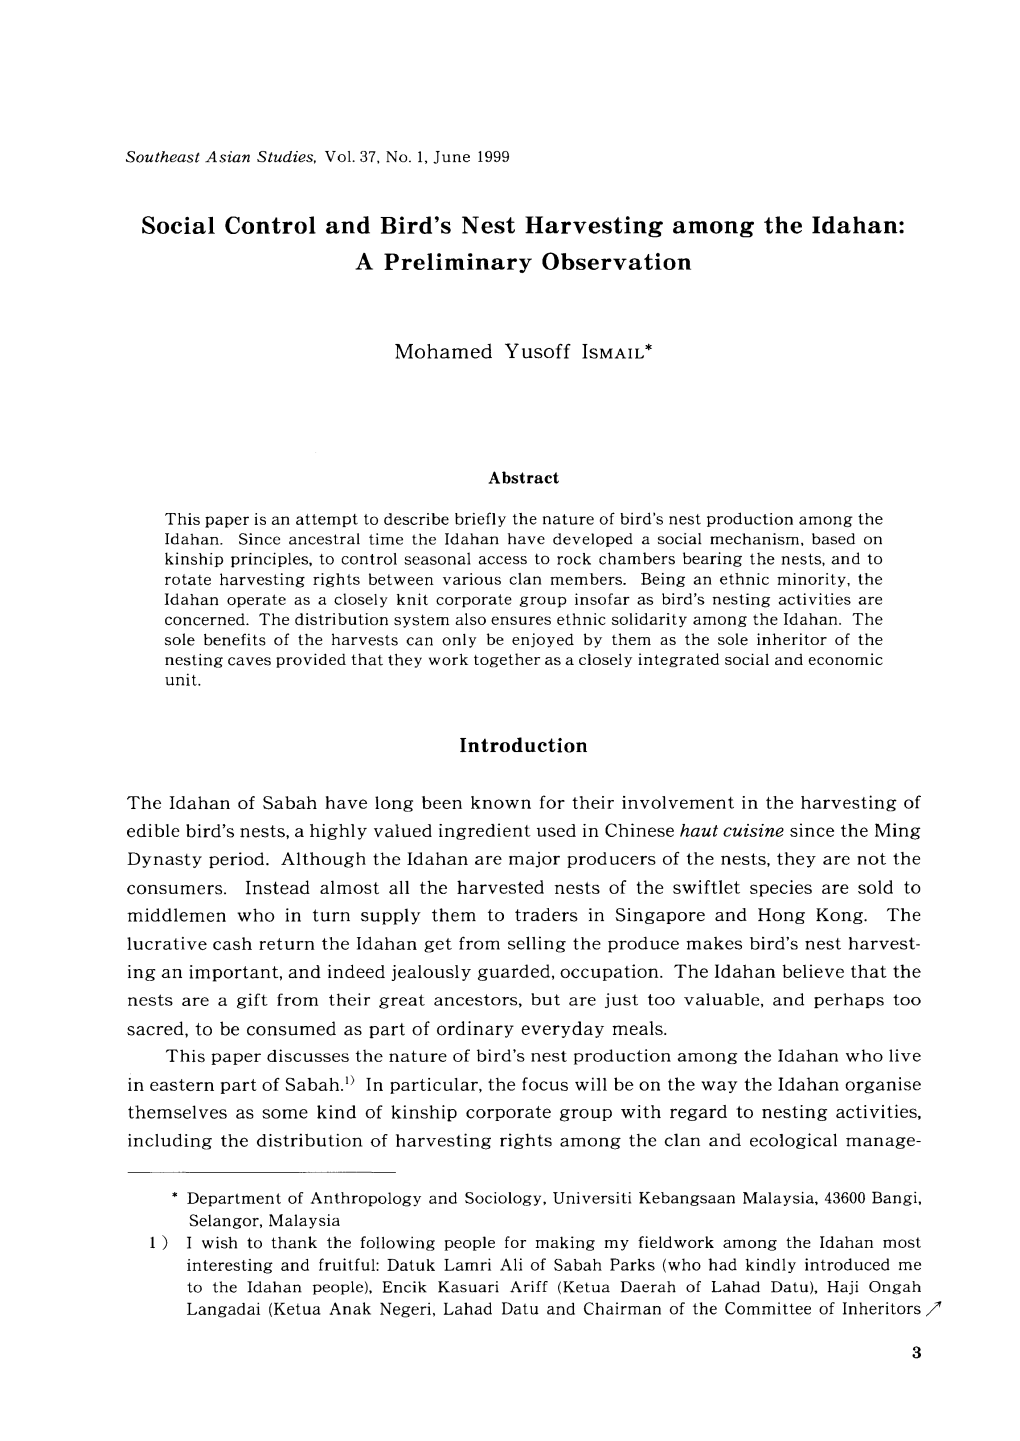 Social Control and Bird's Nest Harvesting Among the Idahan: a Preliminary Observation